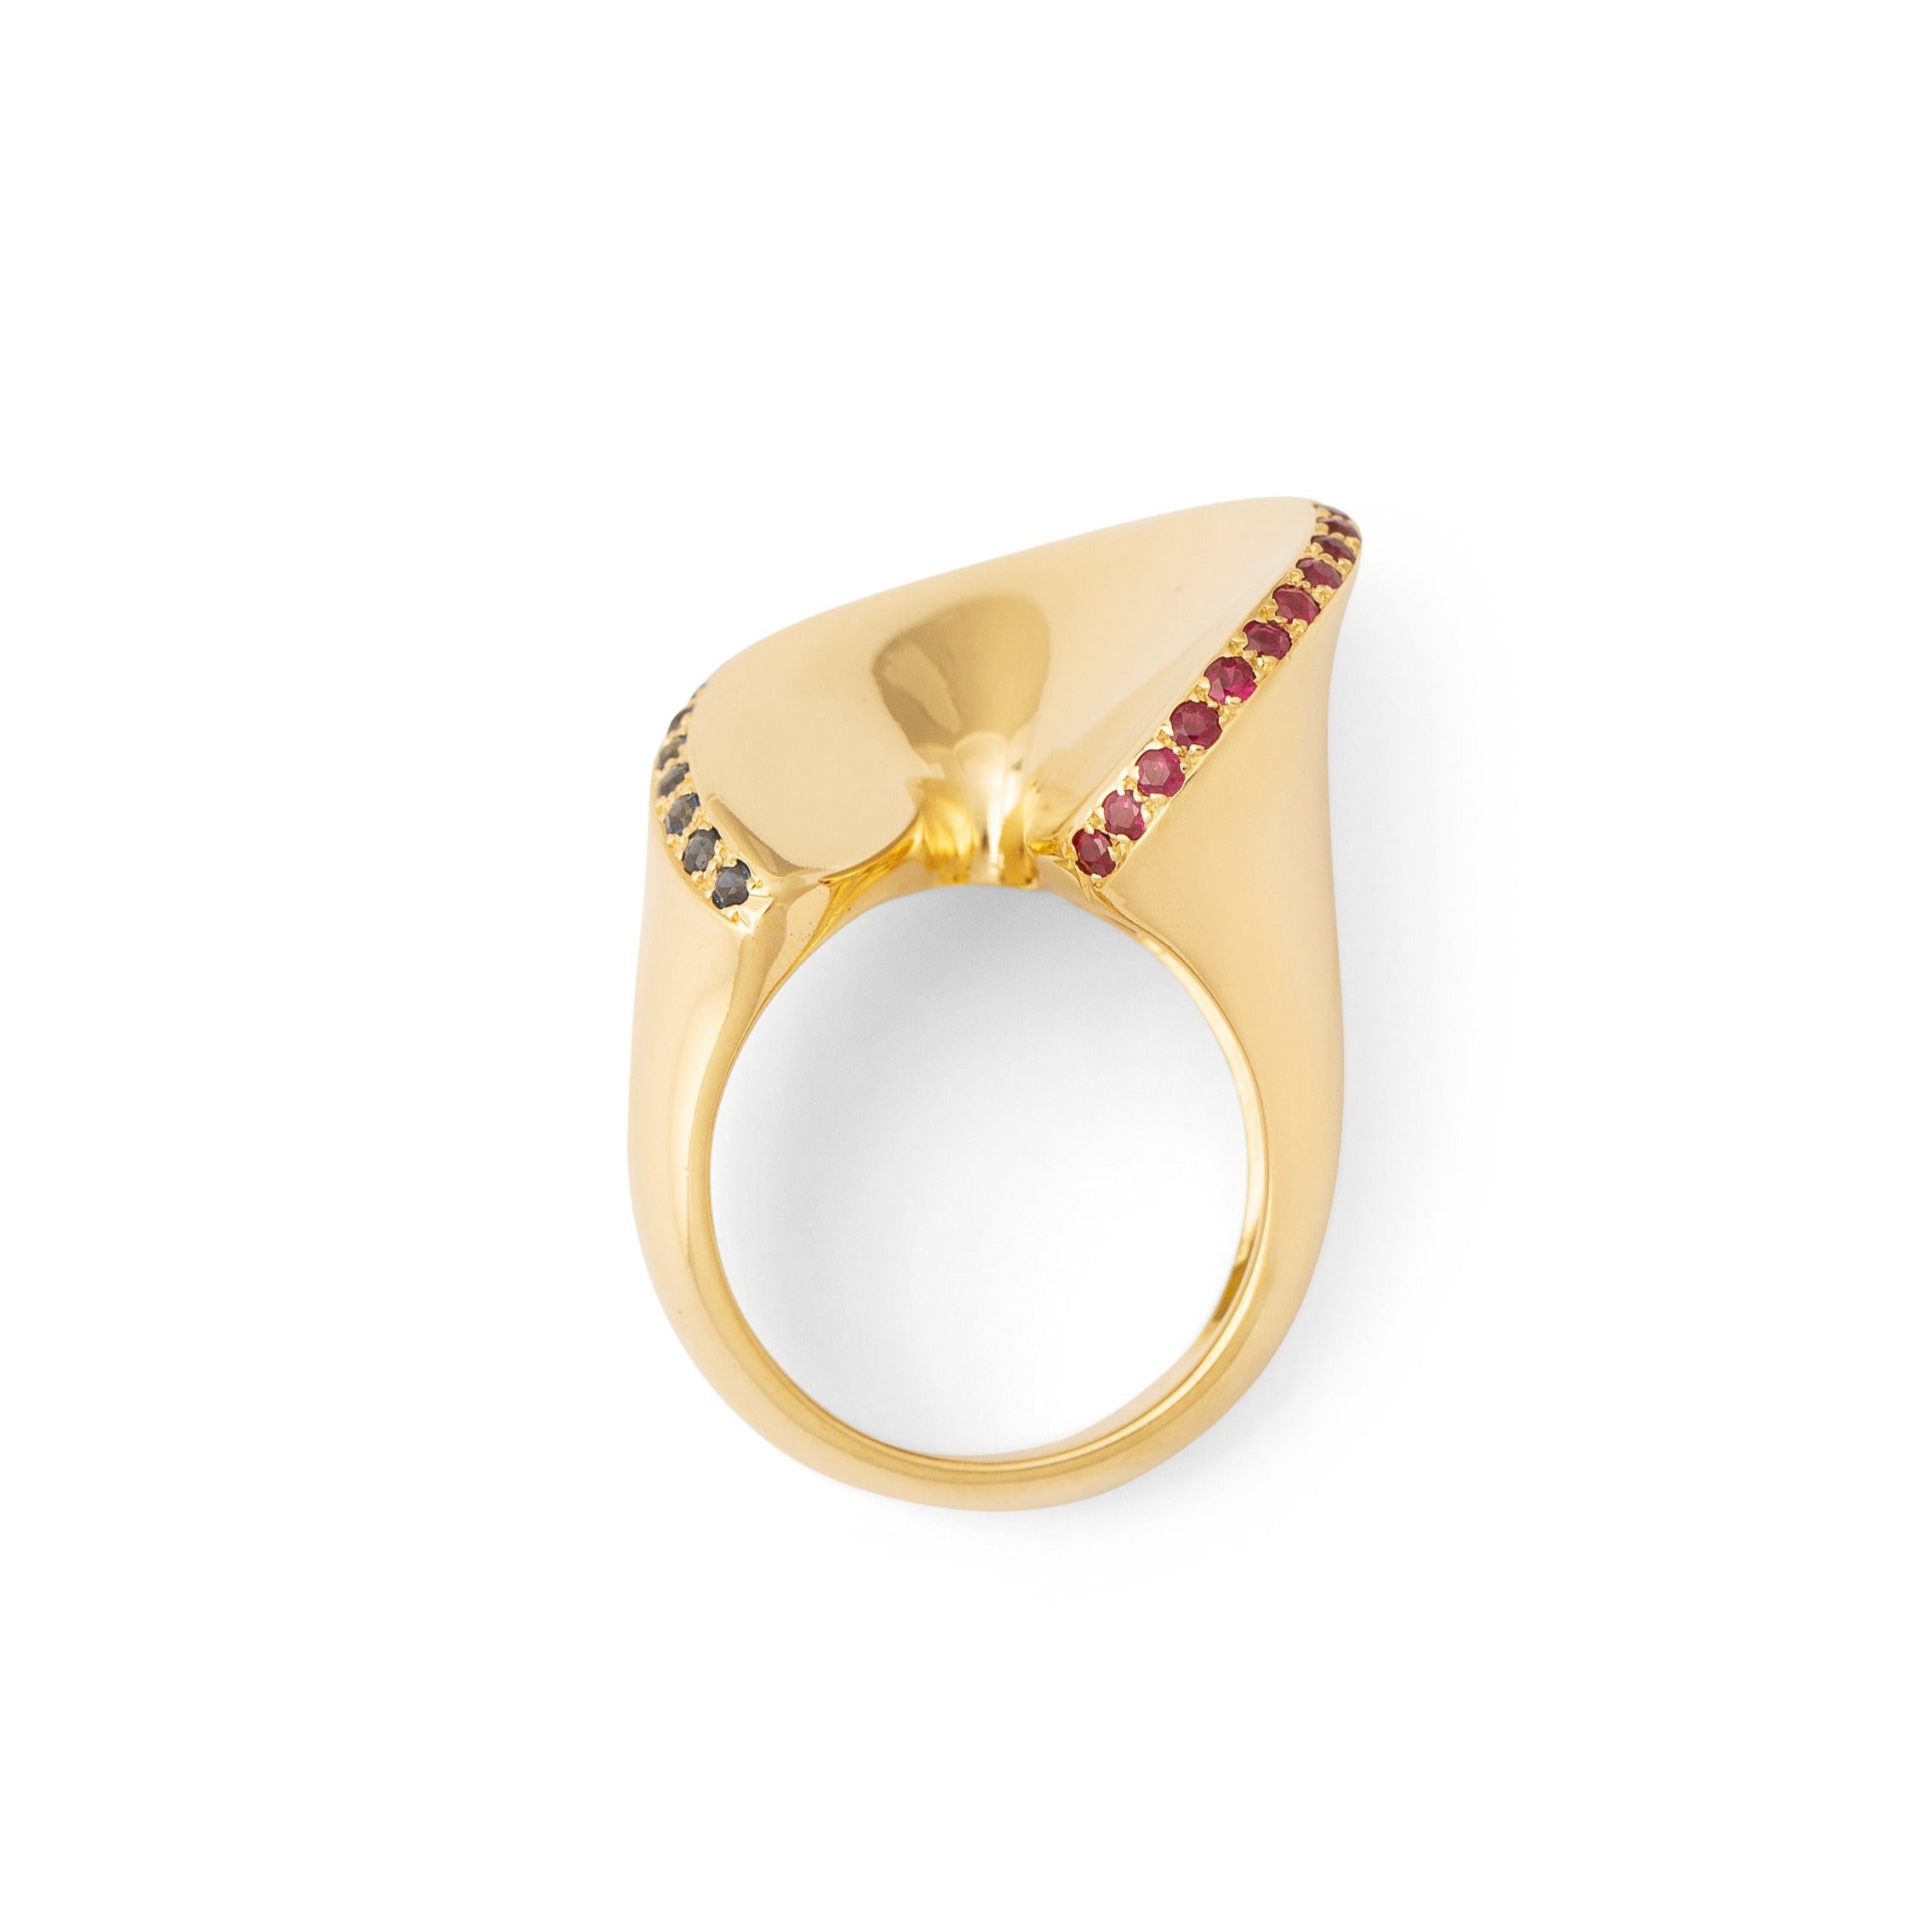 French Sapphire, Diamond, Ruby and 18k Gold Cocktail Ring